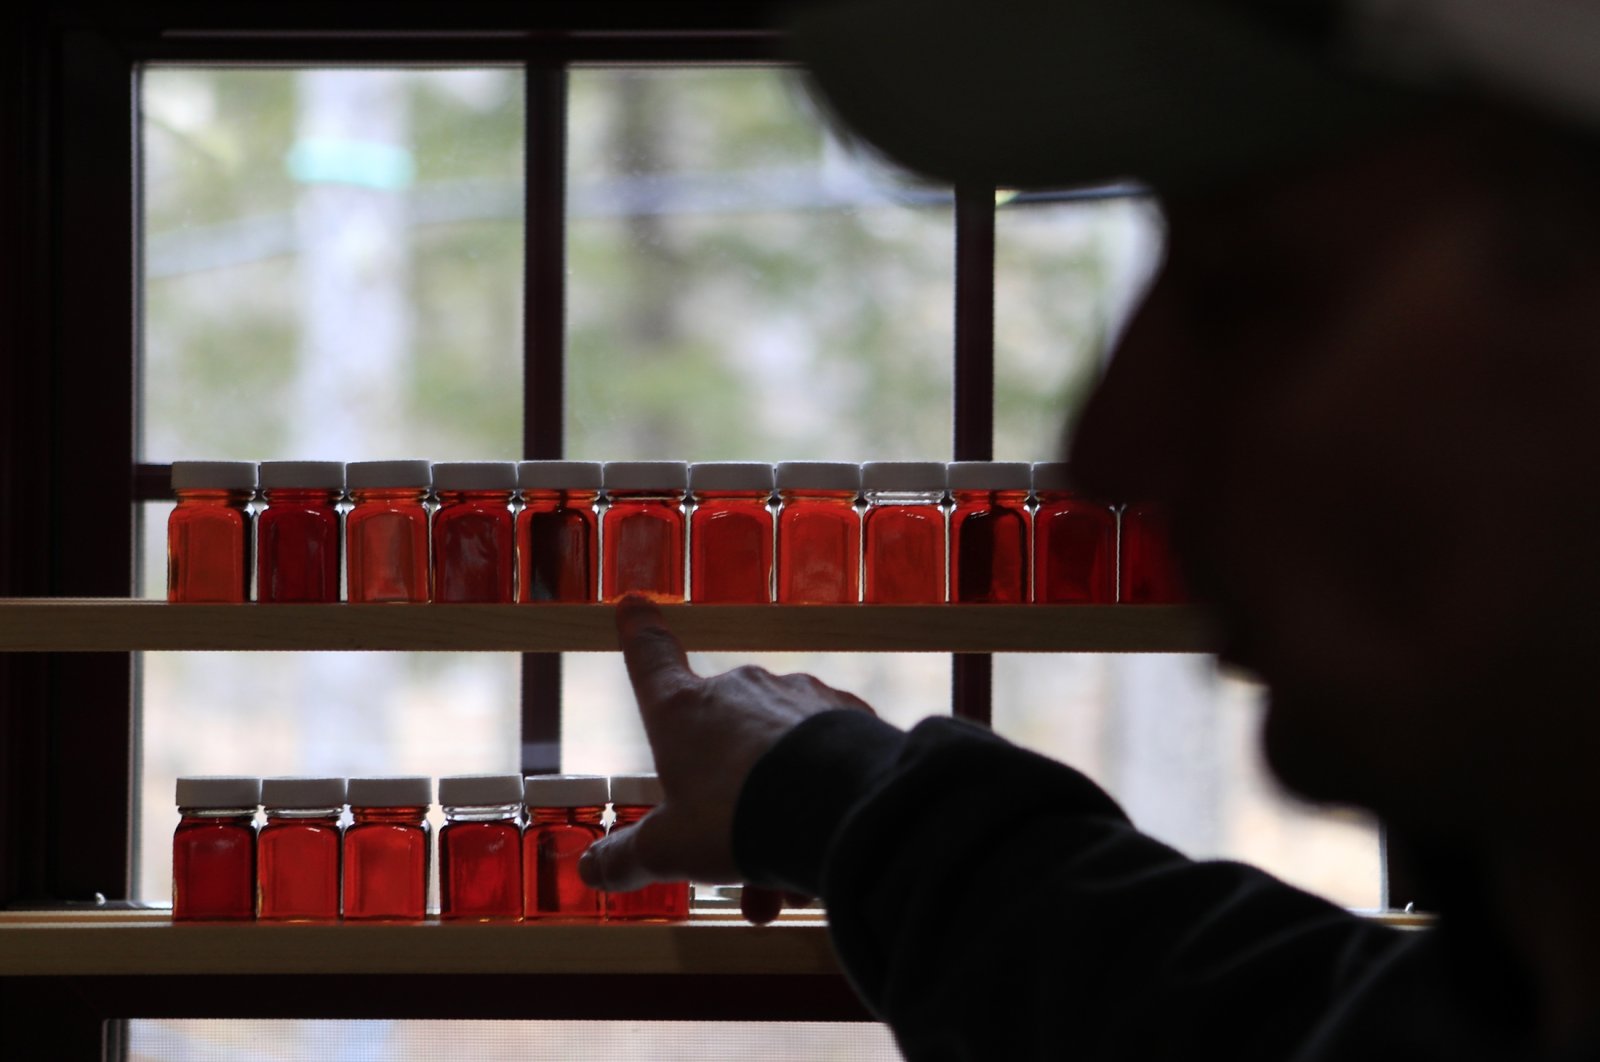 A man shows a visitor the different grades of maple syrup produced this season at the Dunn Family Maple sugar house in Buxton, Maine, U.S., April 1, 2020. (AP Photo)